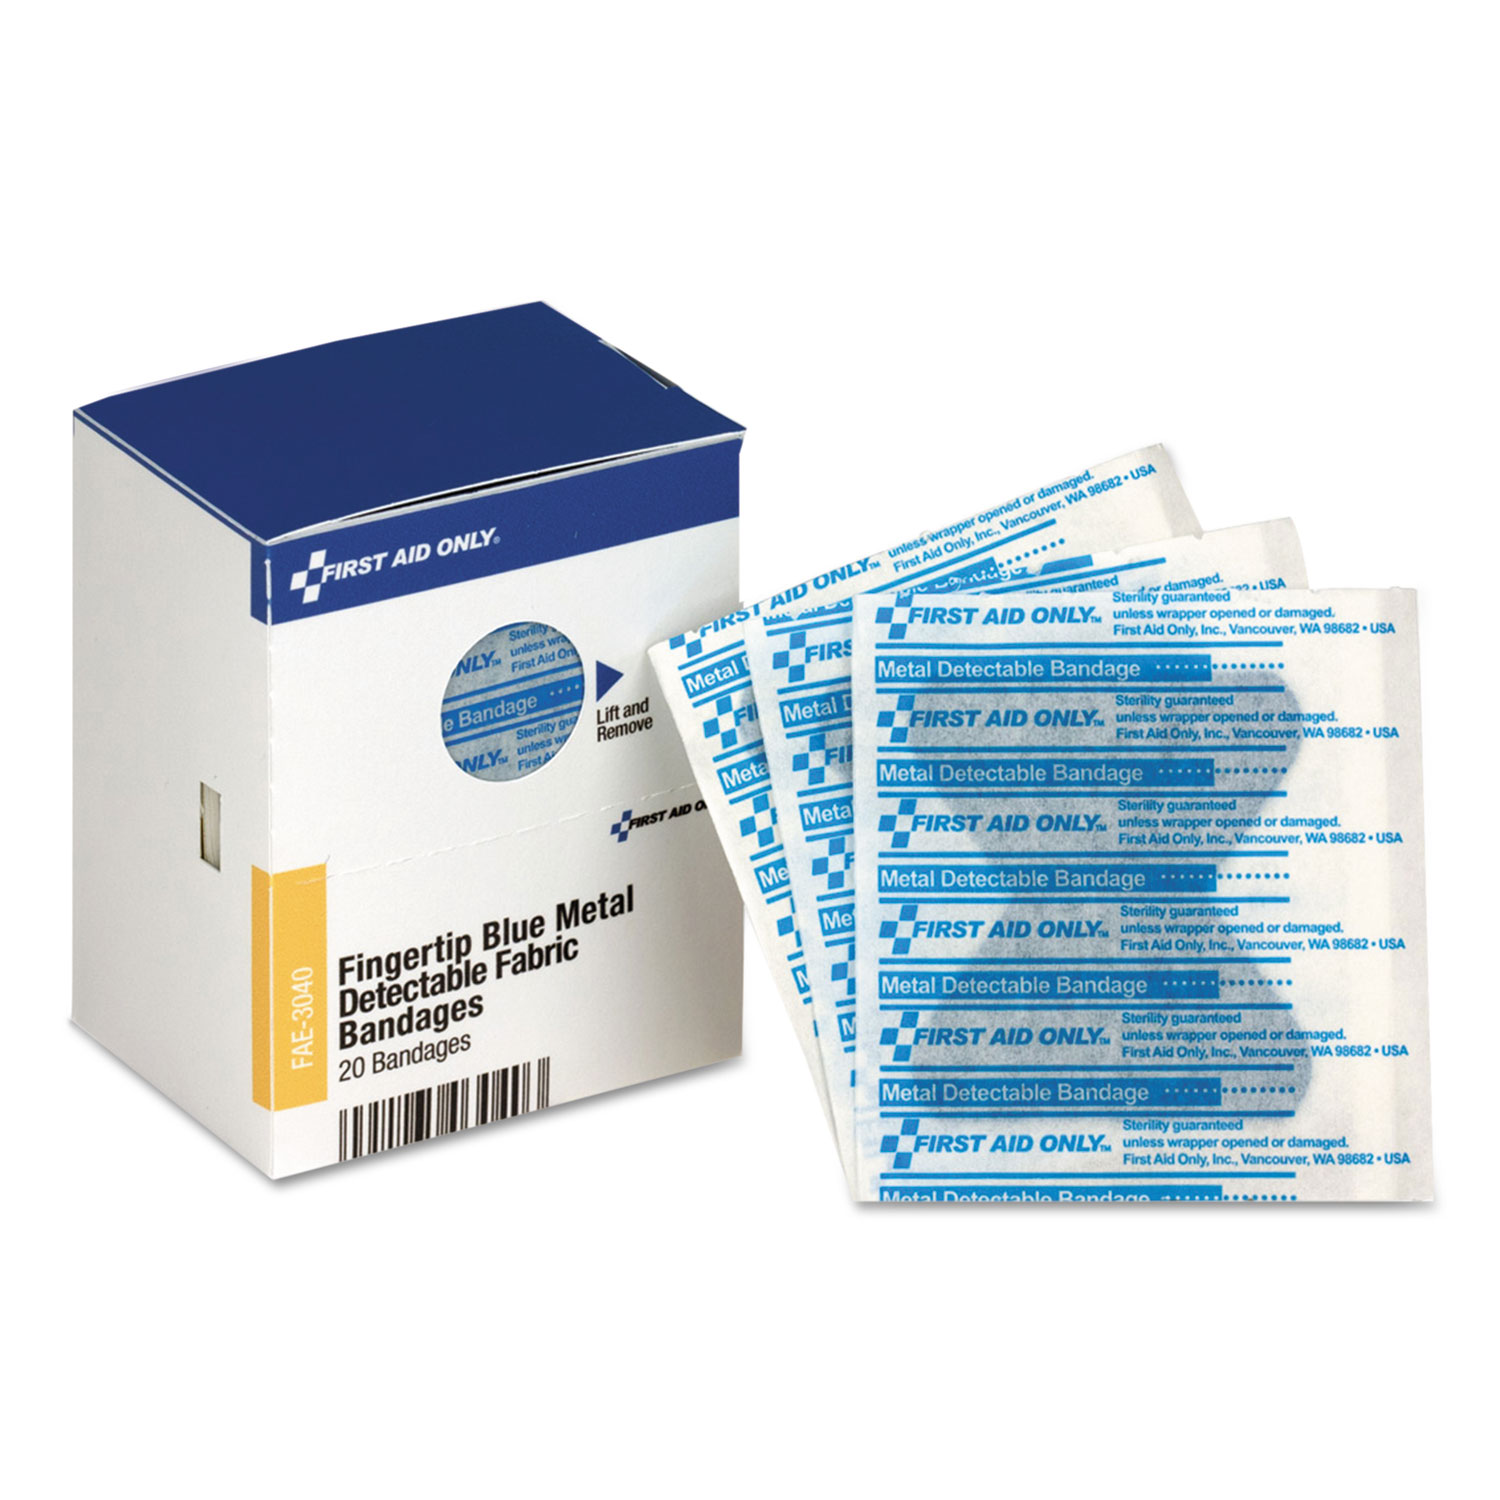  First Aid Only FAE-3040 SmartCompliance Blue Metal Detectable Bandages,Fingertip,1 3/4x2, 20 Bx, 24/Ct (FAOFAE3040) 